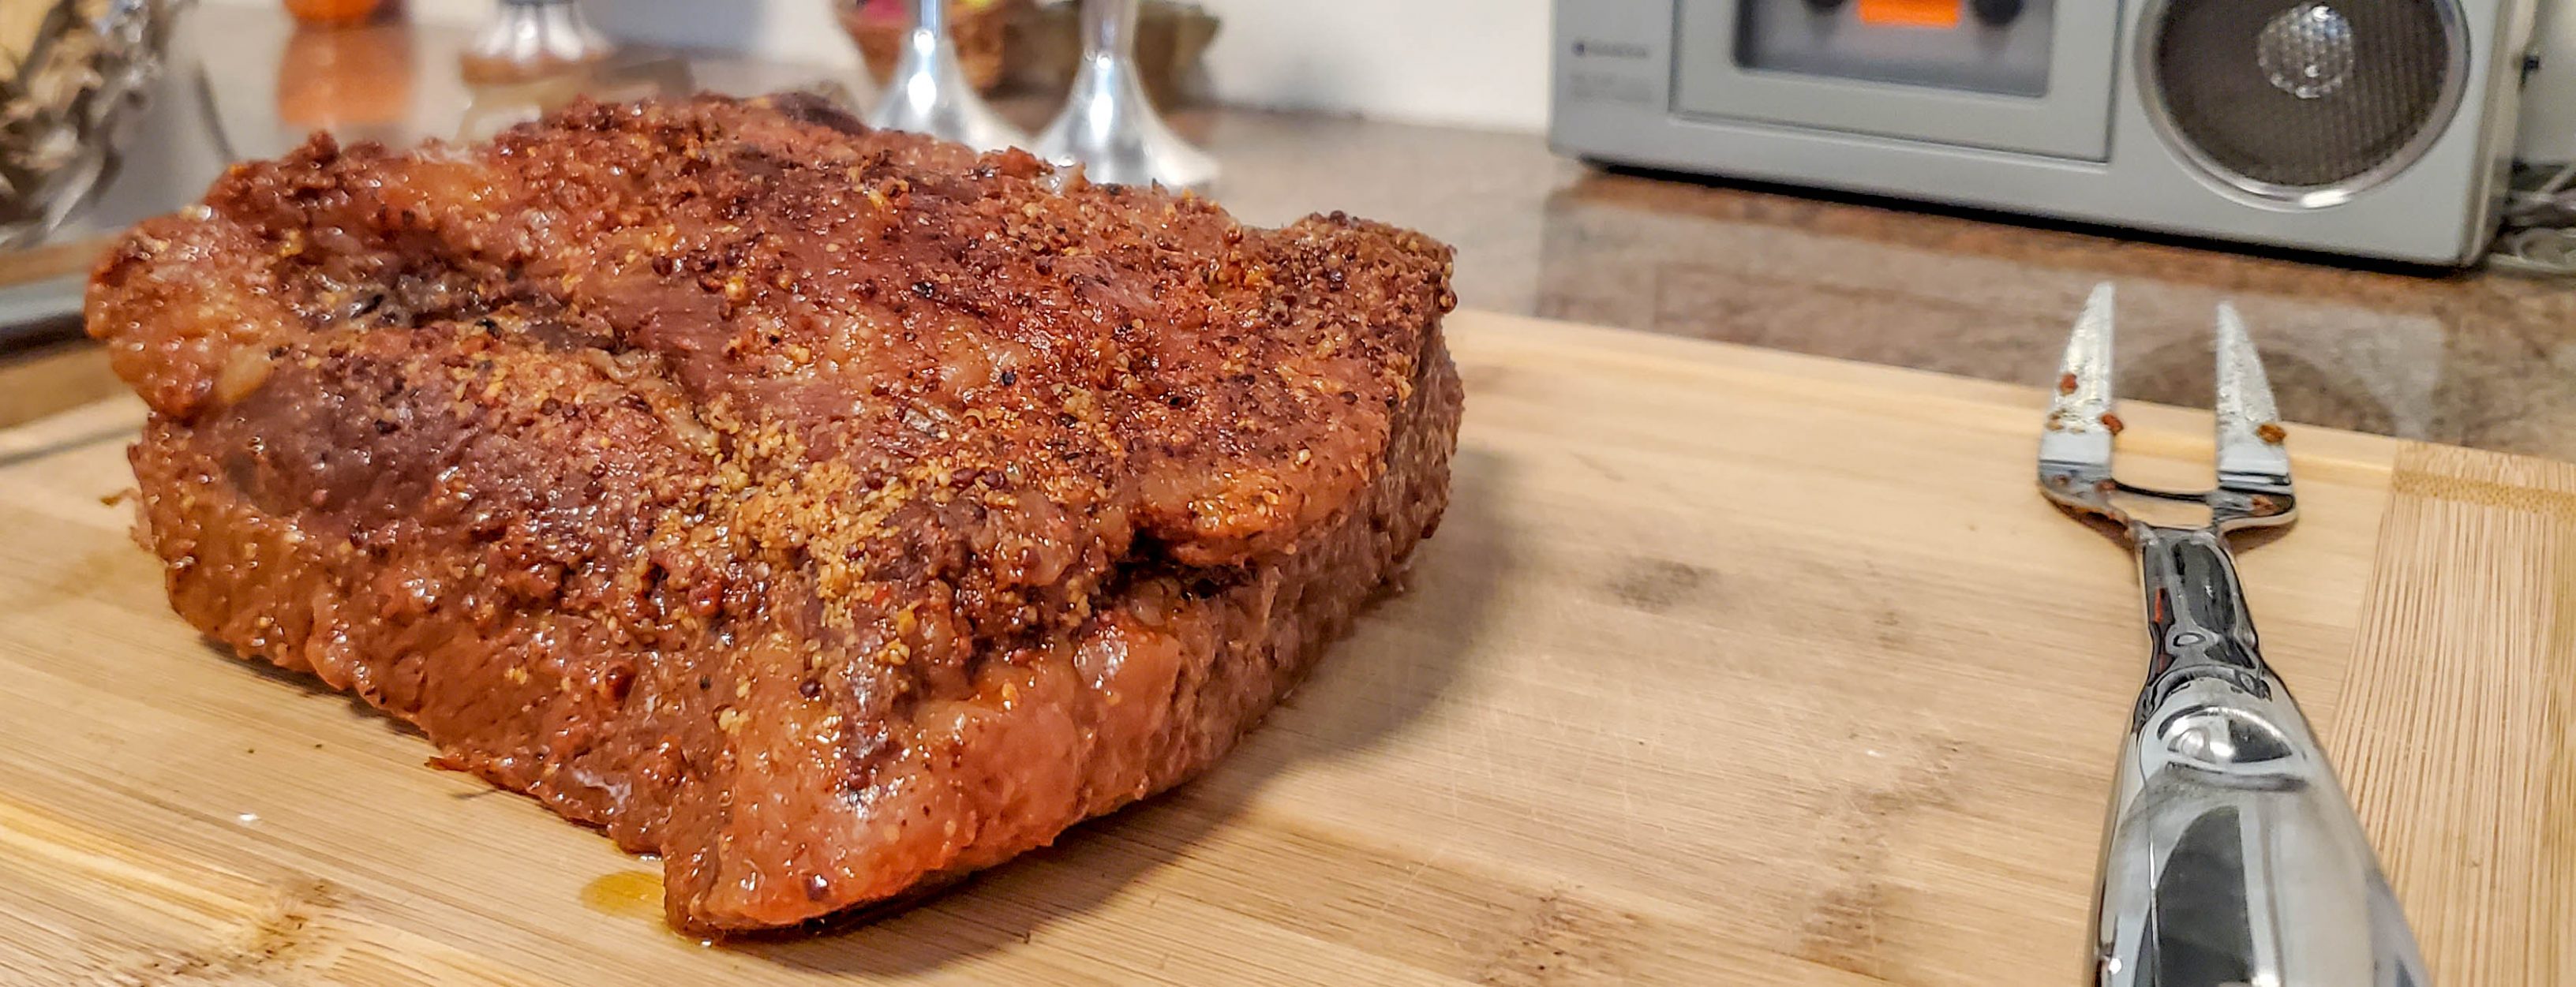 Oven Baked Brisket Recipe - With Paprika and Hickory Liquid Smoke